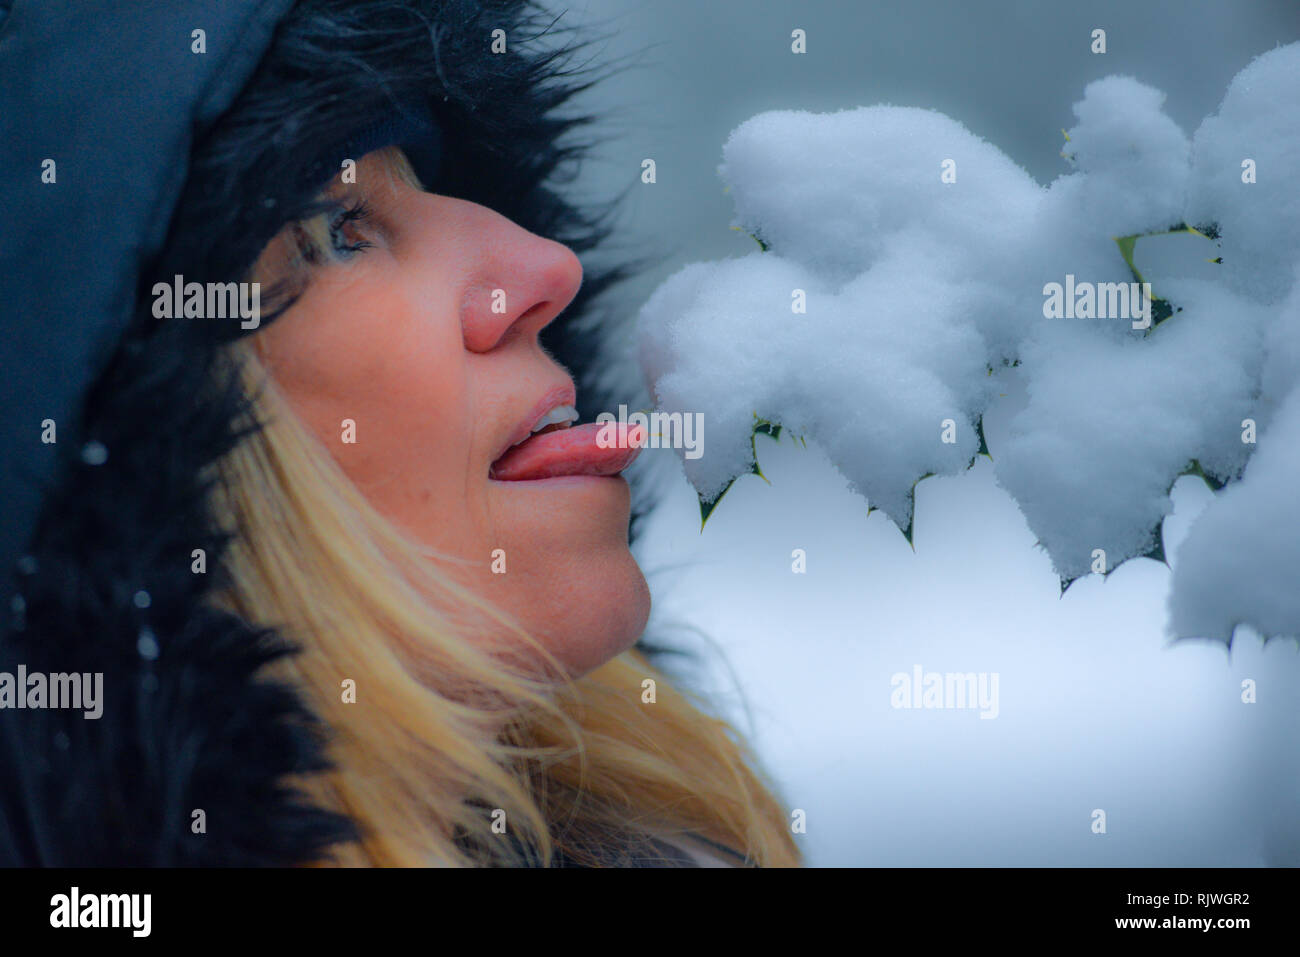 Woman with blond hair and a fur lined coat hoot touching snow with the tip of her tongue. Stock Photo